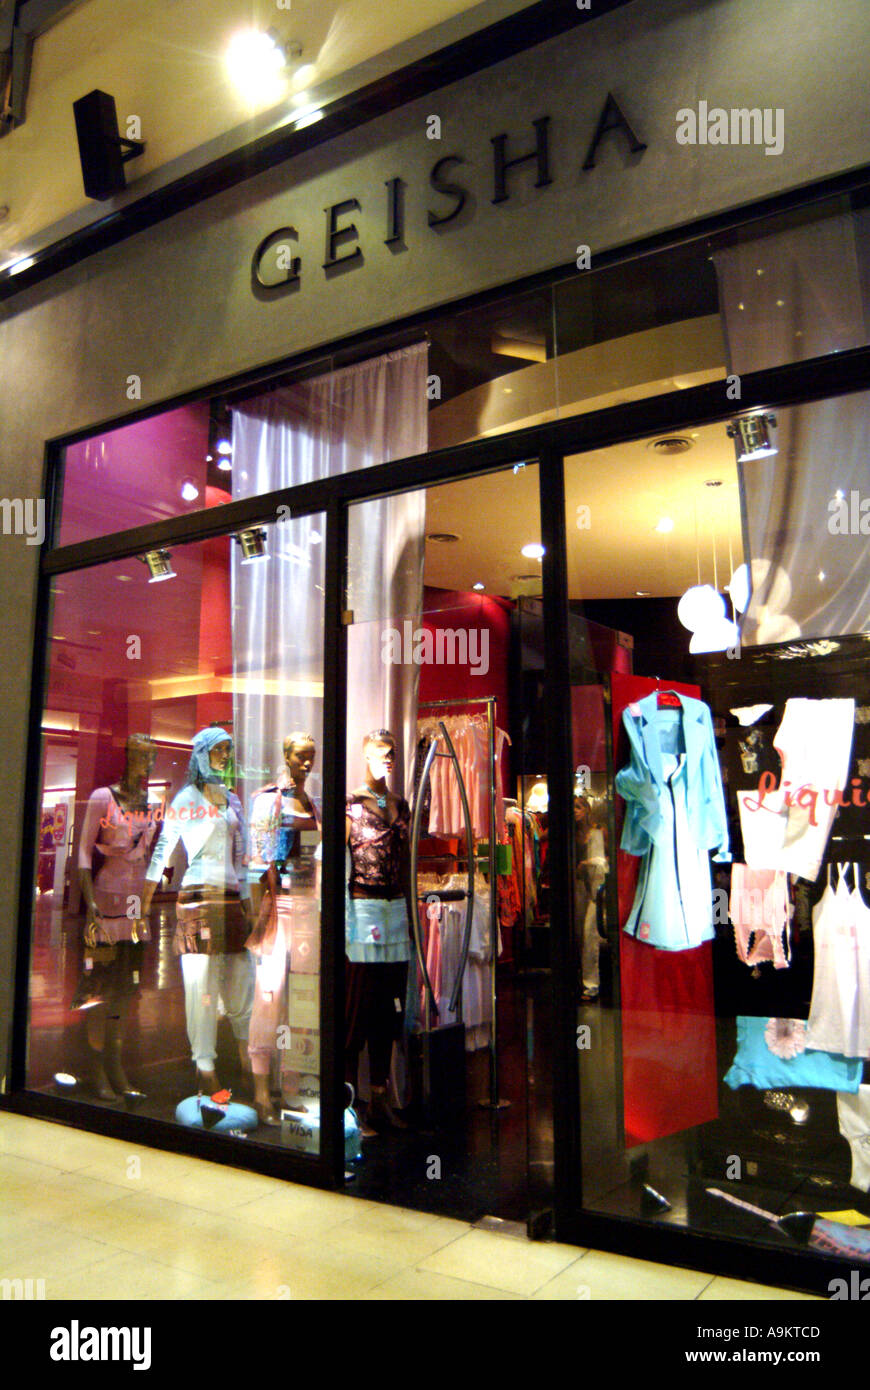 Argentina Buenos Aires Geisha fashion shop in the Abasto Shopping Centre at night Stock Photo